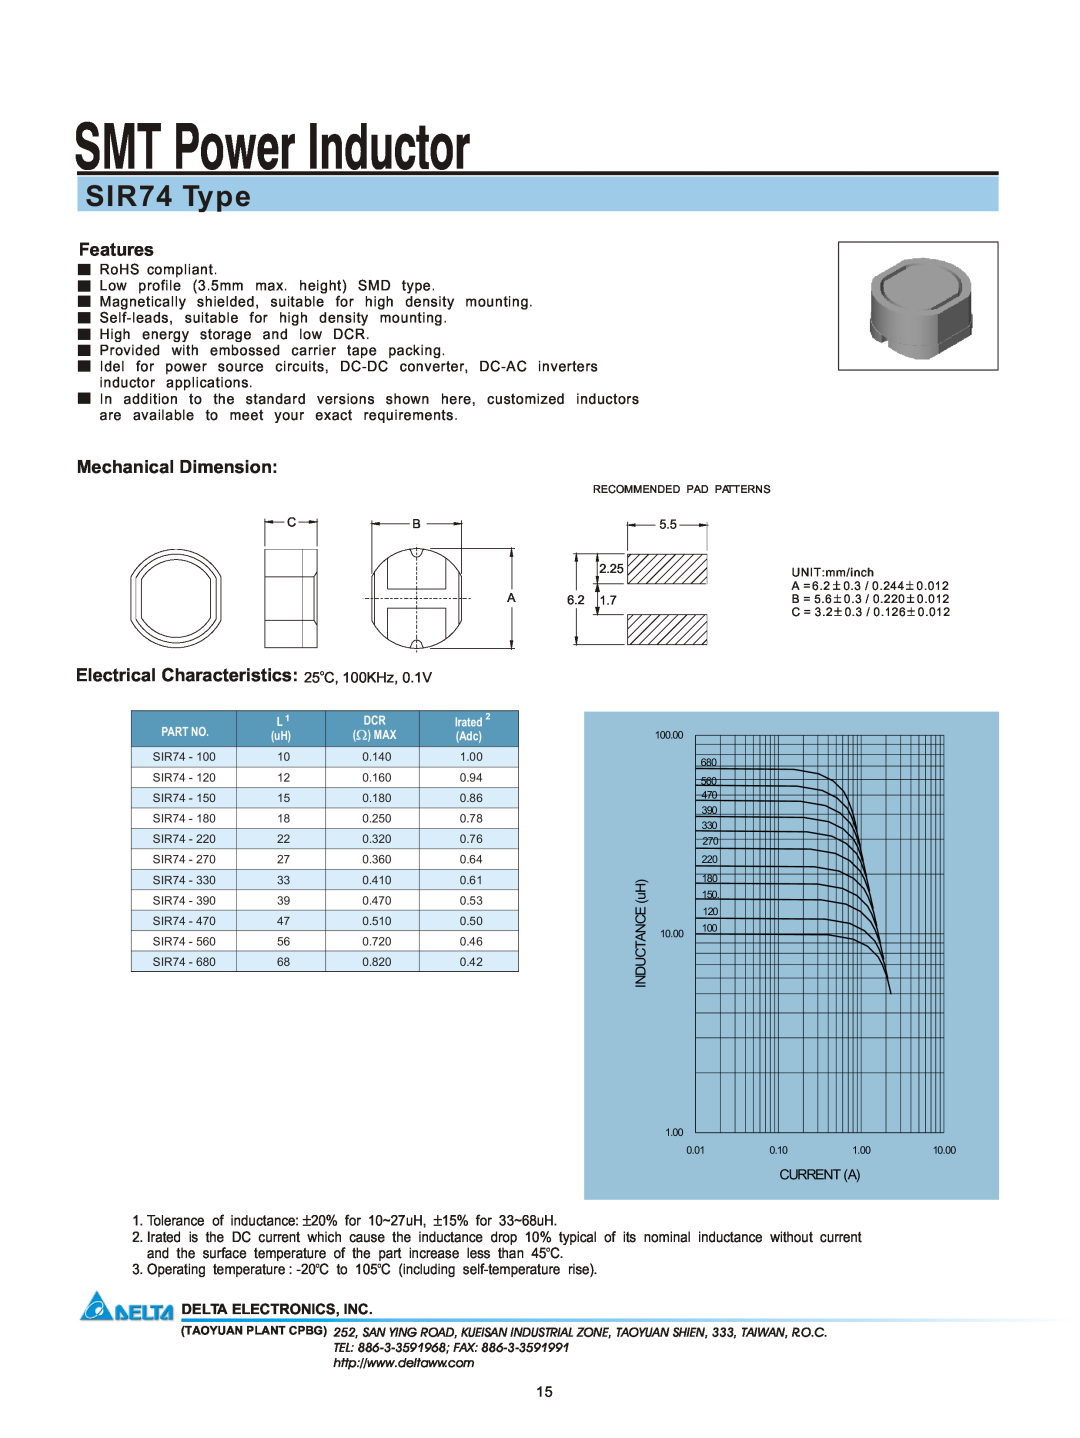 Delta Electronics manual SMT Power Inductor, SIR74 Type, Features, Mechanical Dimension, Delta Electronics, Inc 